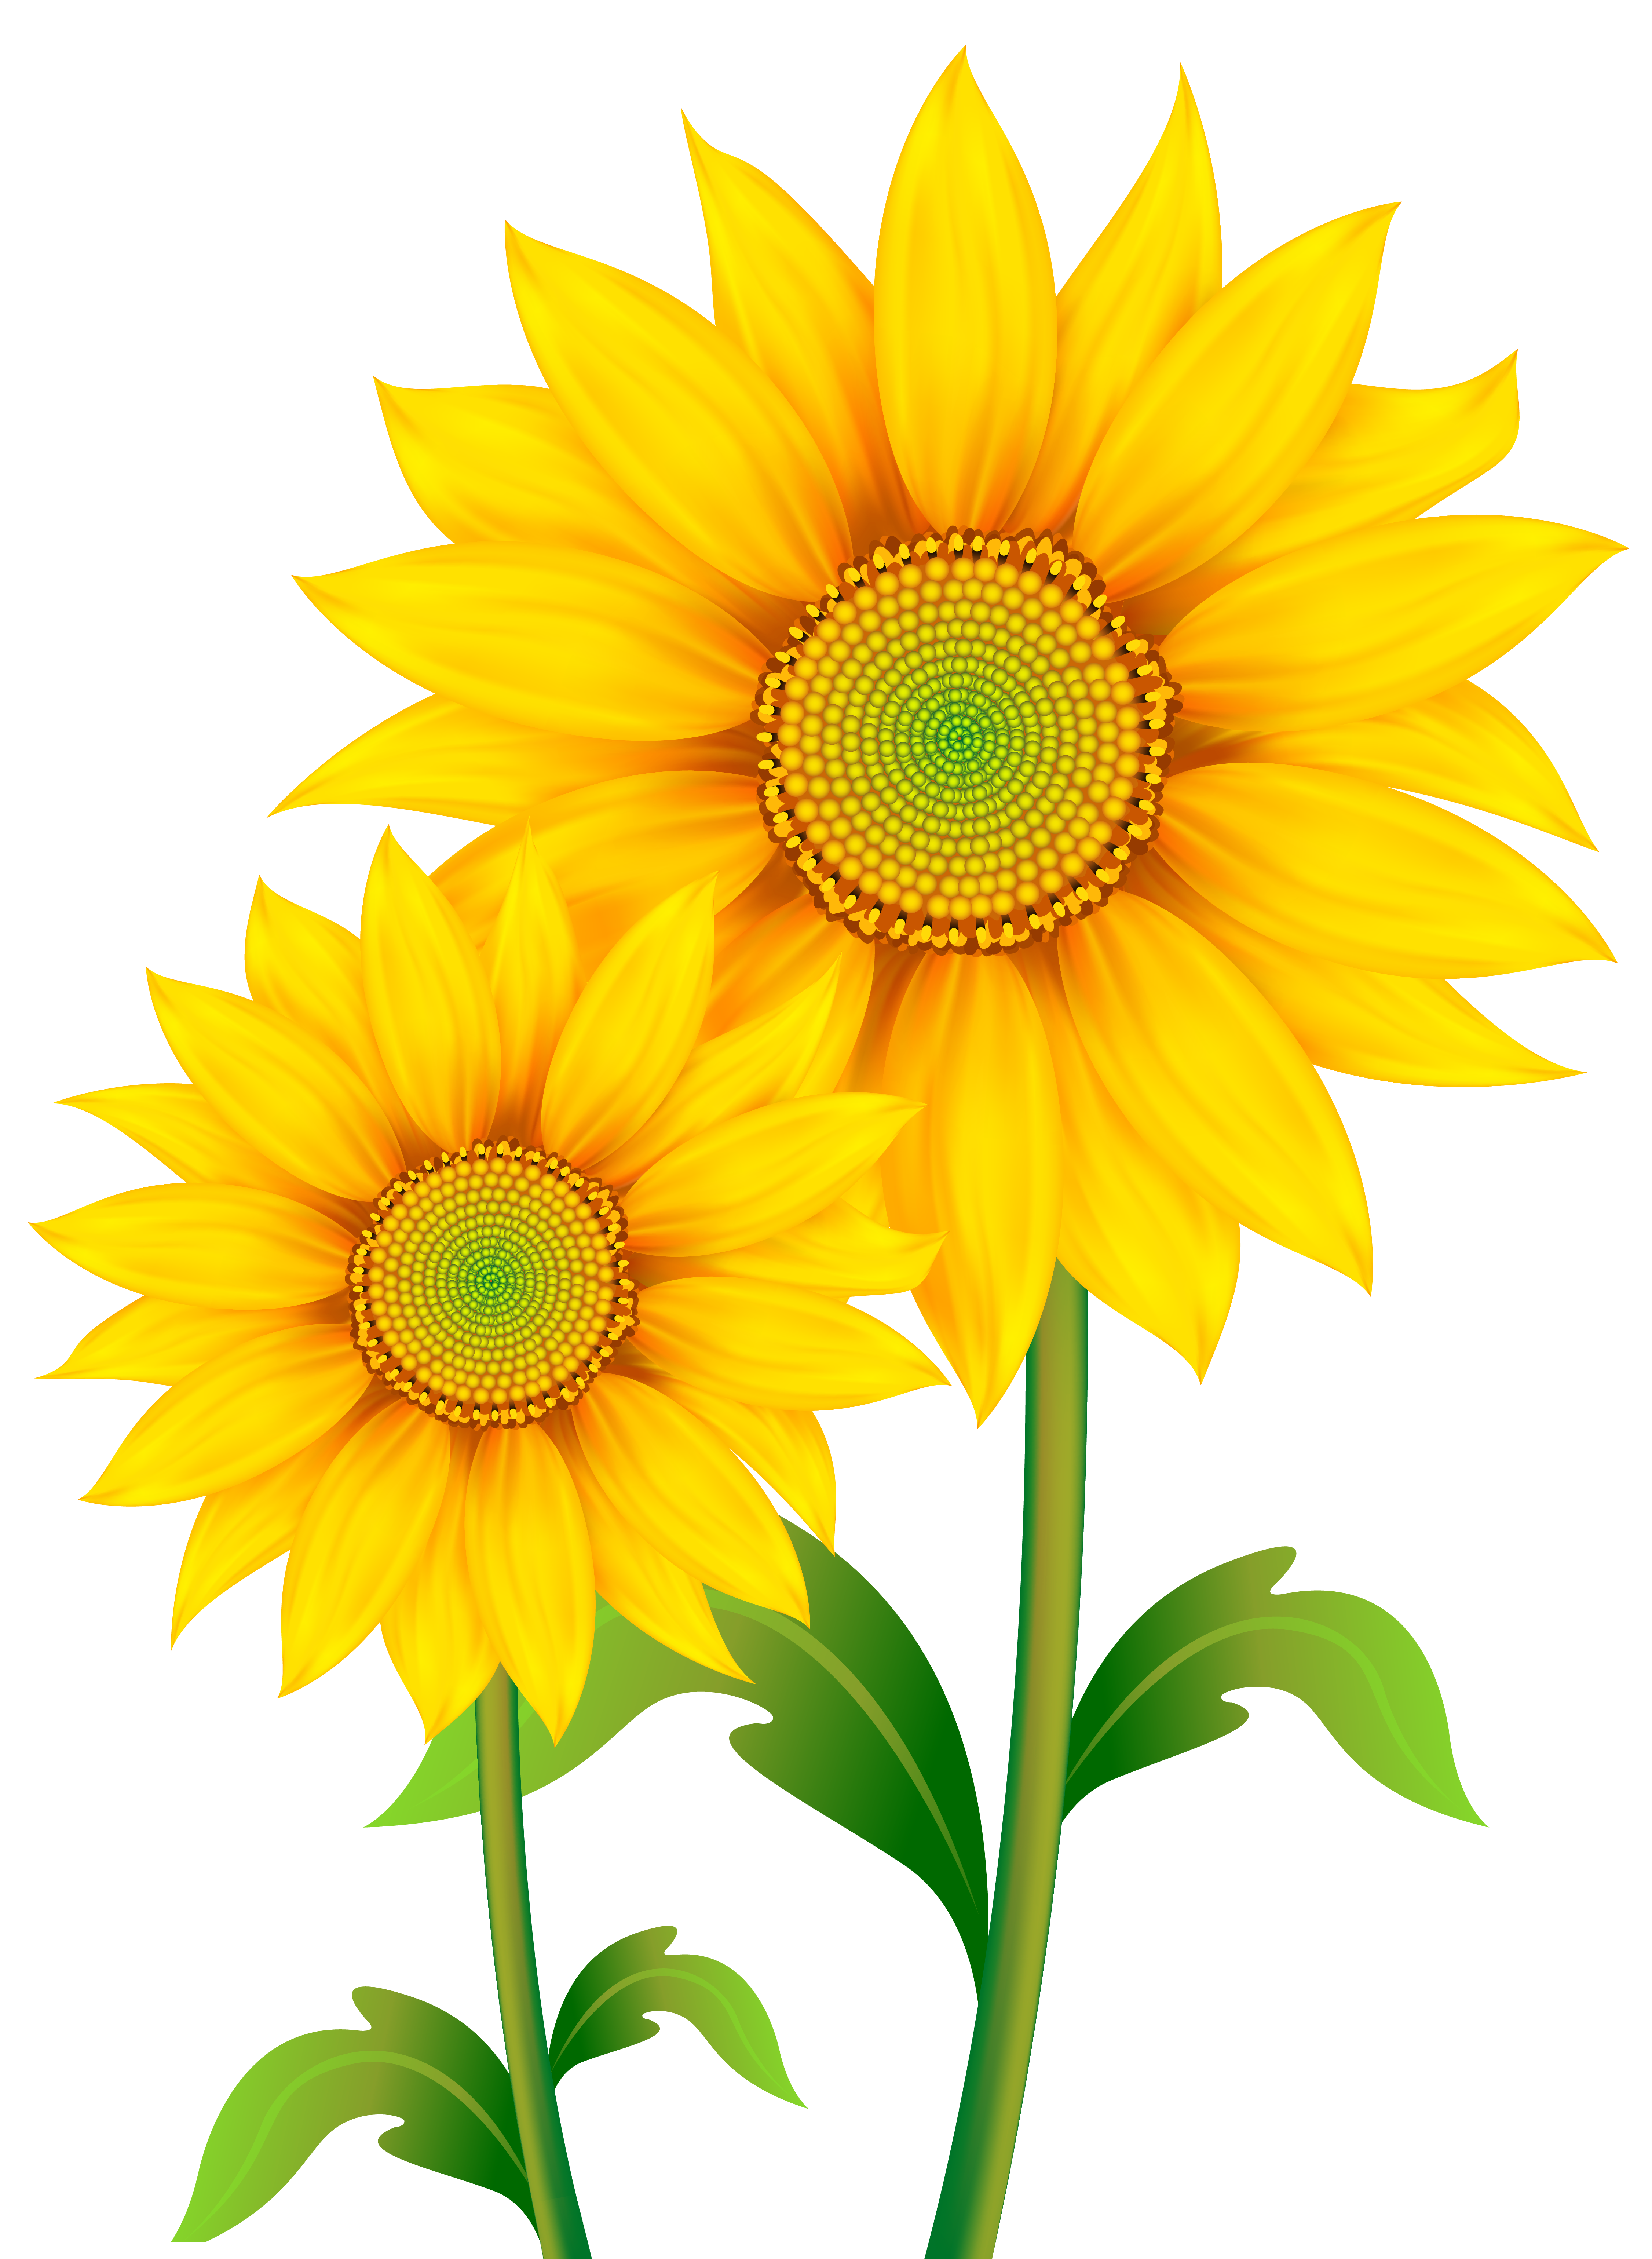 Free Sunflowers Cliparts, Download Free Sunflowers Cliparts png images